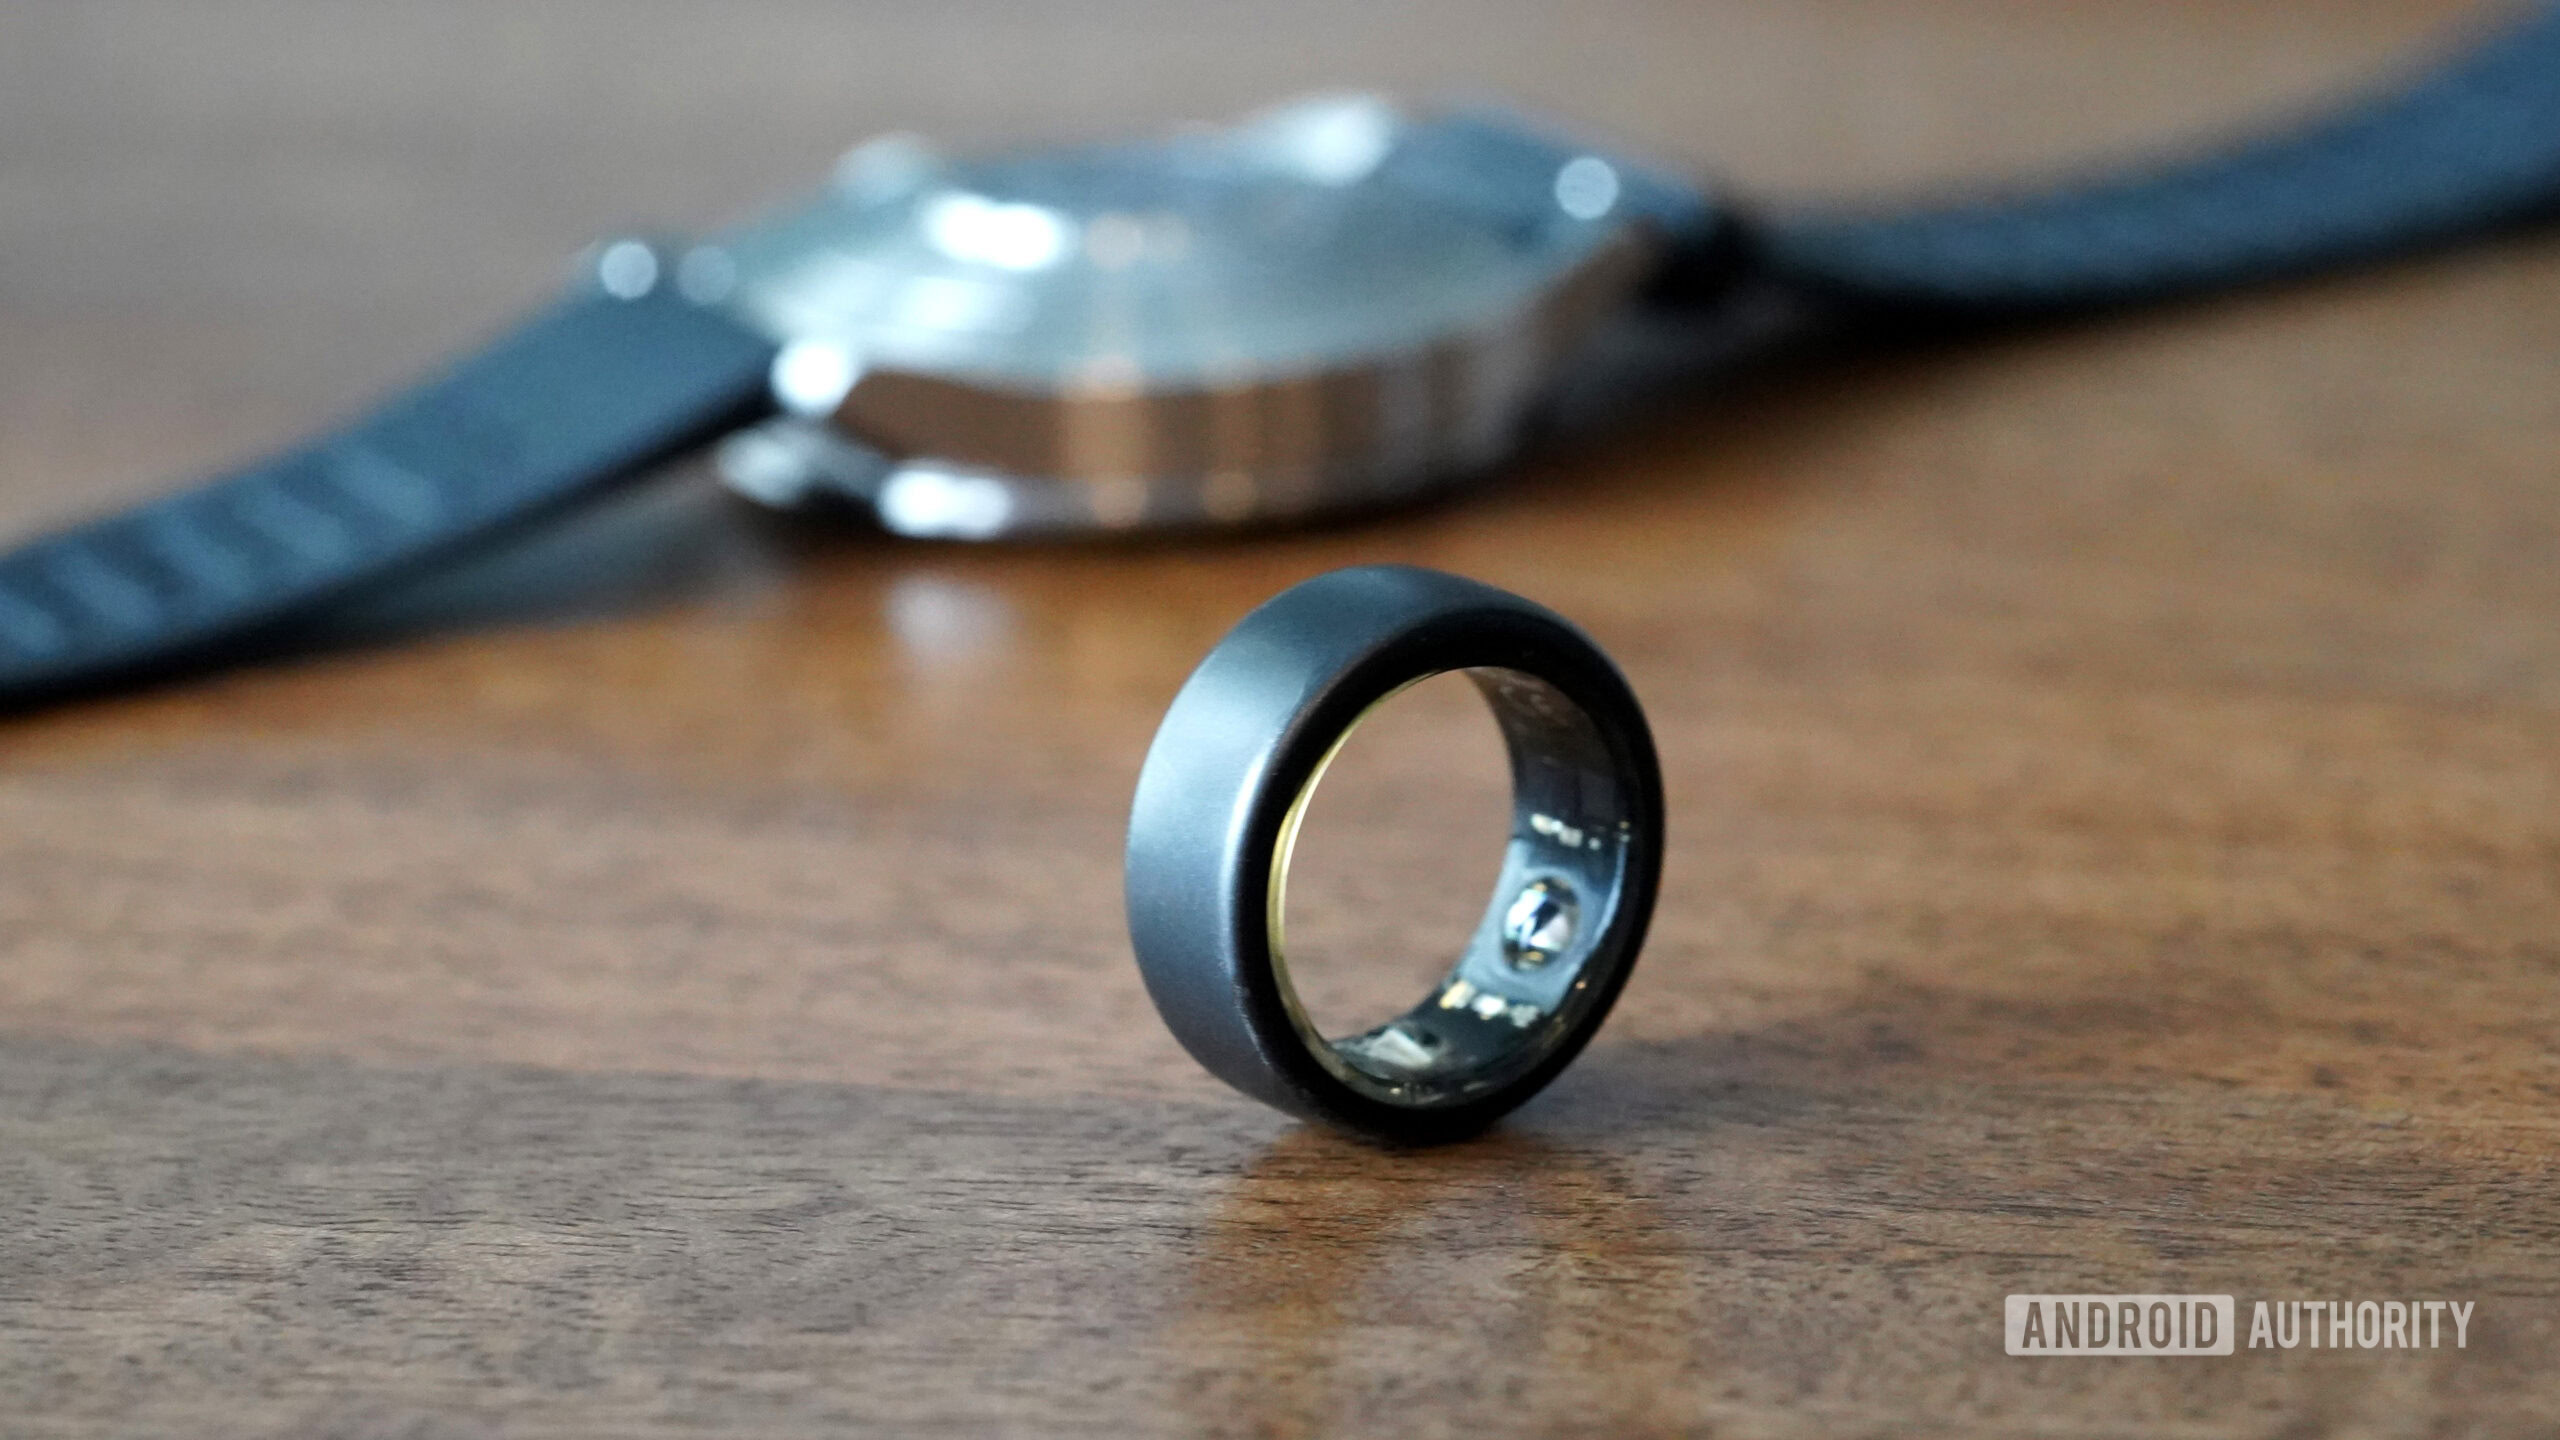 An Oura Ring 3 rests in front of a hybrid smartwatch.